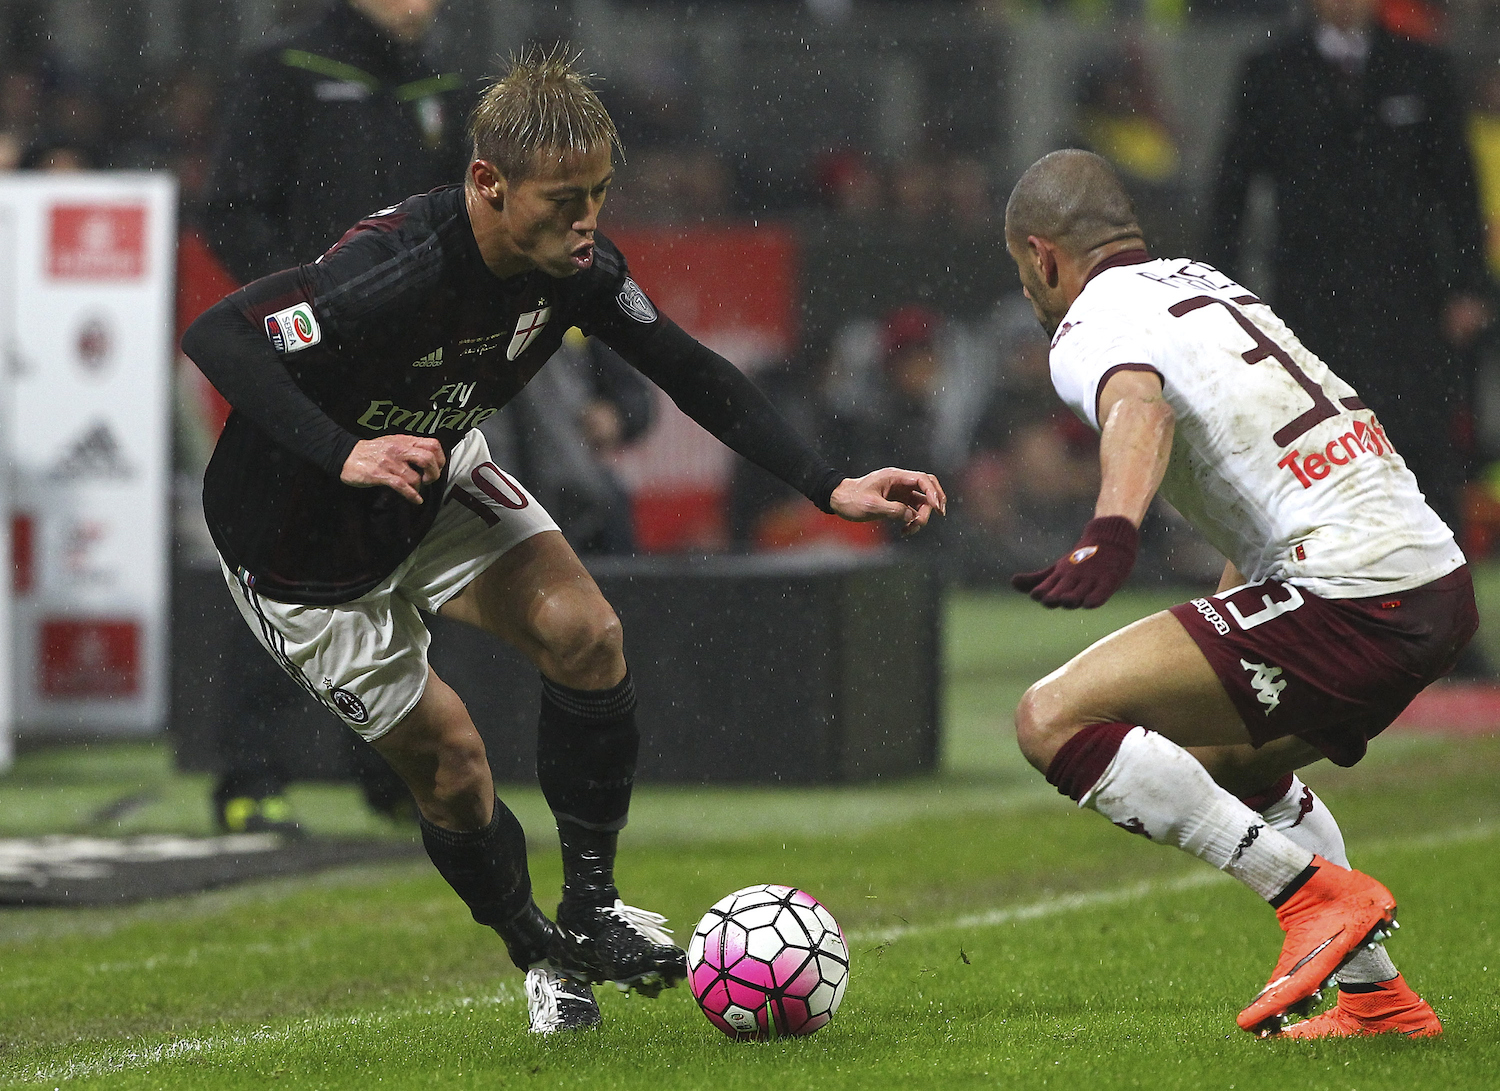 Honda squares up with Bruno Peres on the right. | Marco Luzzani/Getty Images